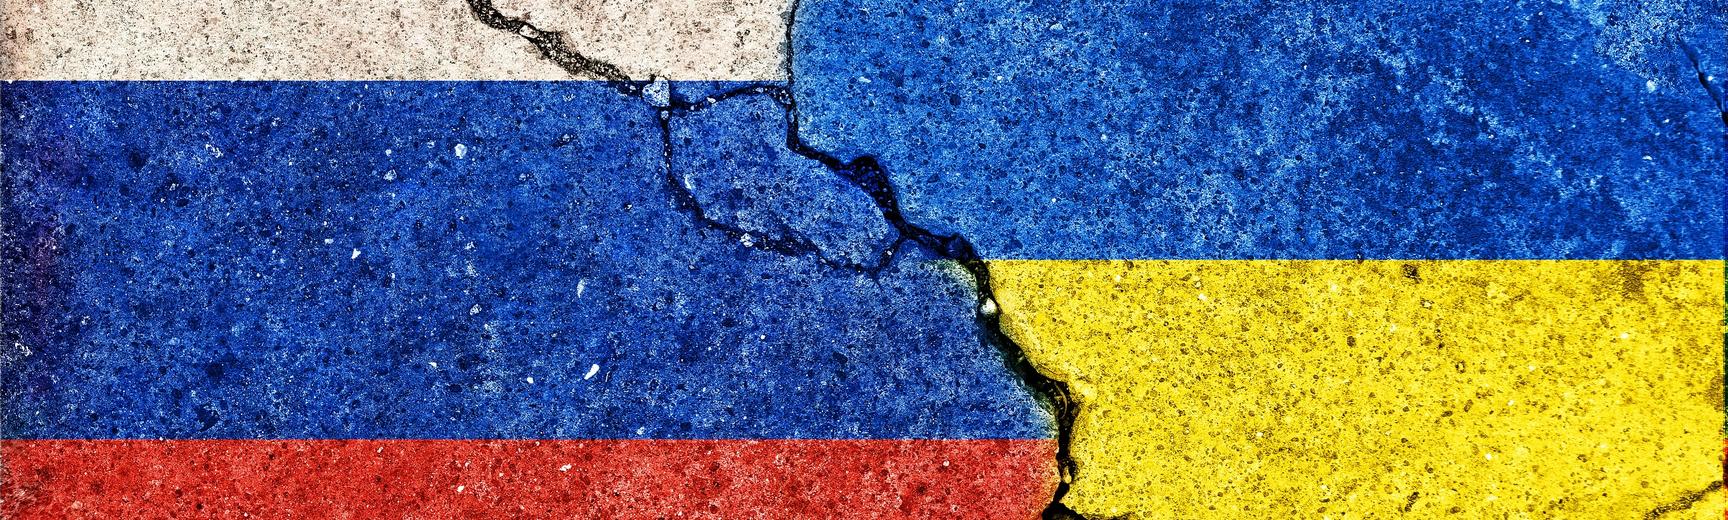 Russia and Ukraine country flags printed on cracked concrete background